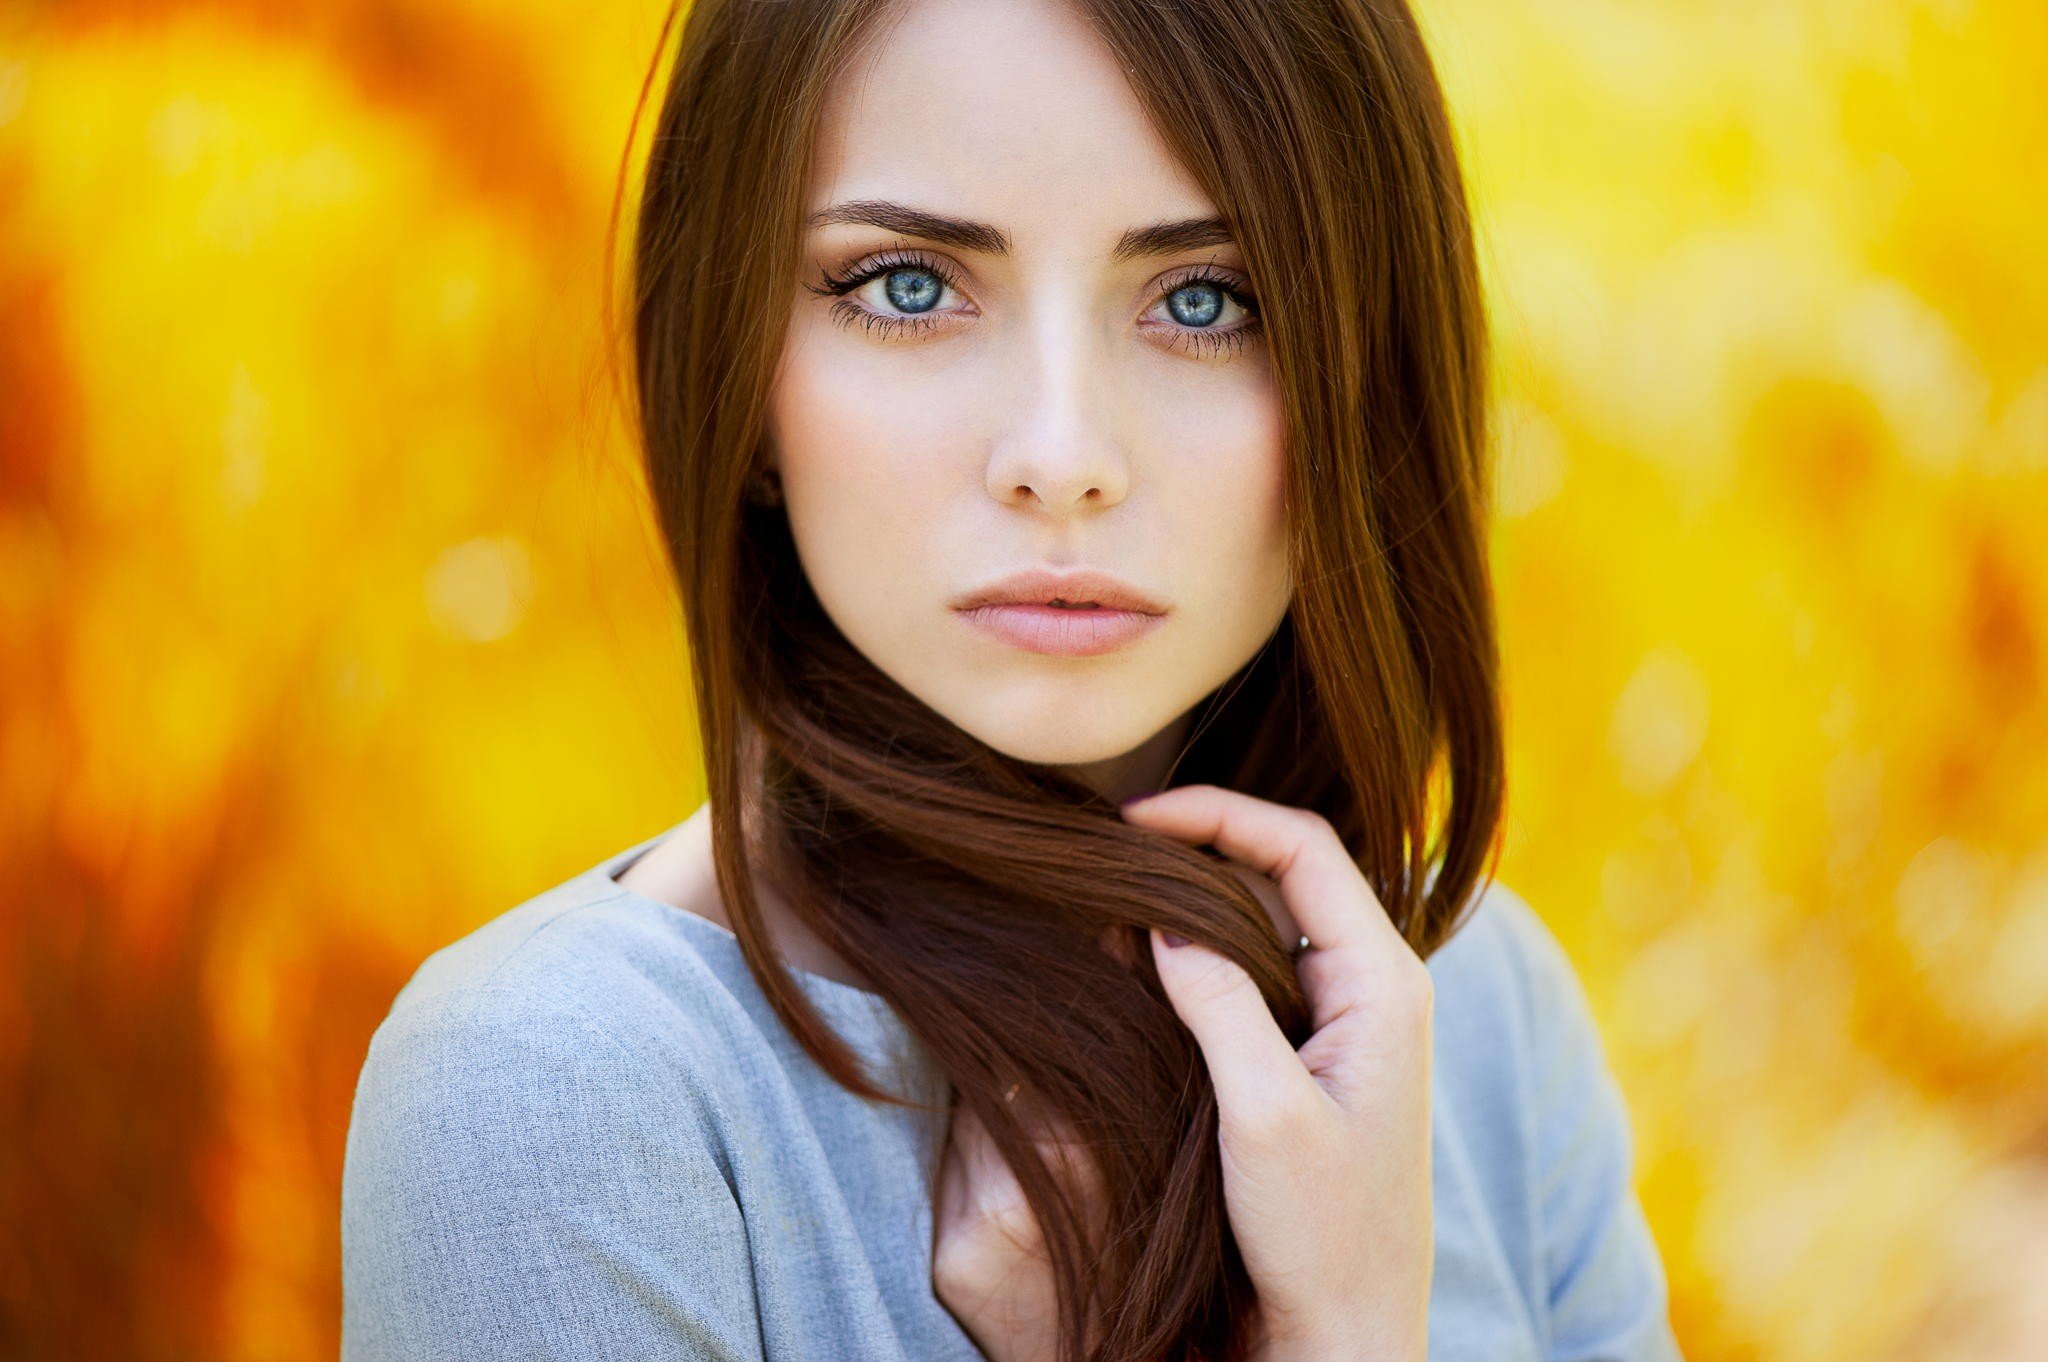 3. "How to Embrace Your Auburn Hair and Blue Eyes as a Female" - wide 7